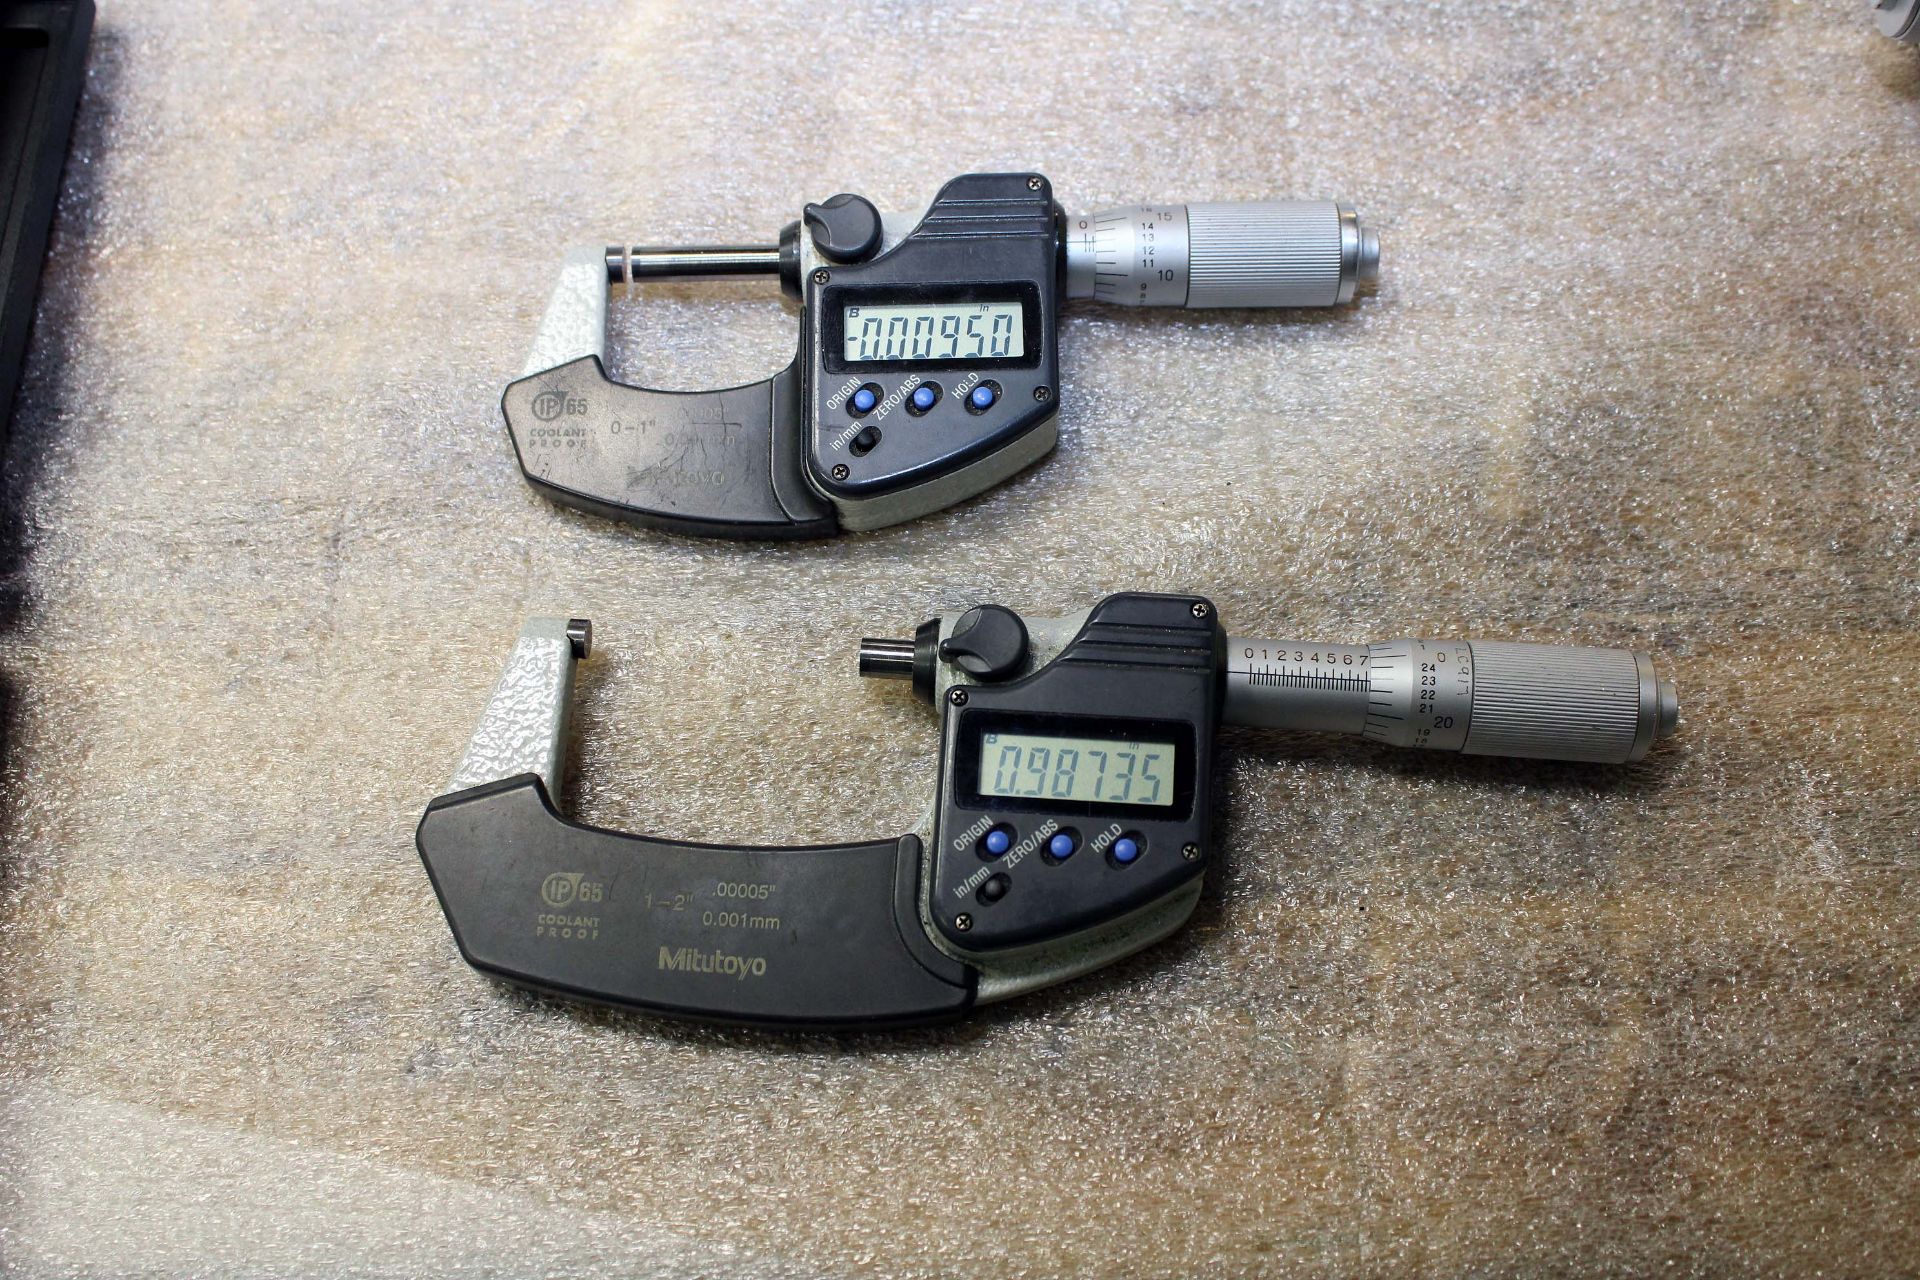 LOT OF DIGITAL MICROMETERS, MITUTOYO, (1) Mdl. 293-344 0 to 1" & (1) Mdl. 293-345 1" to 2"